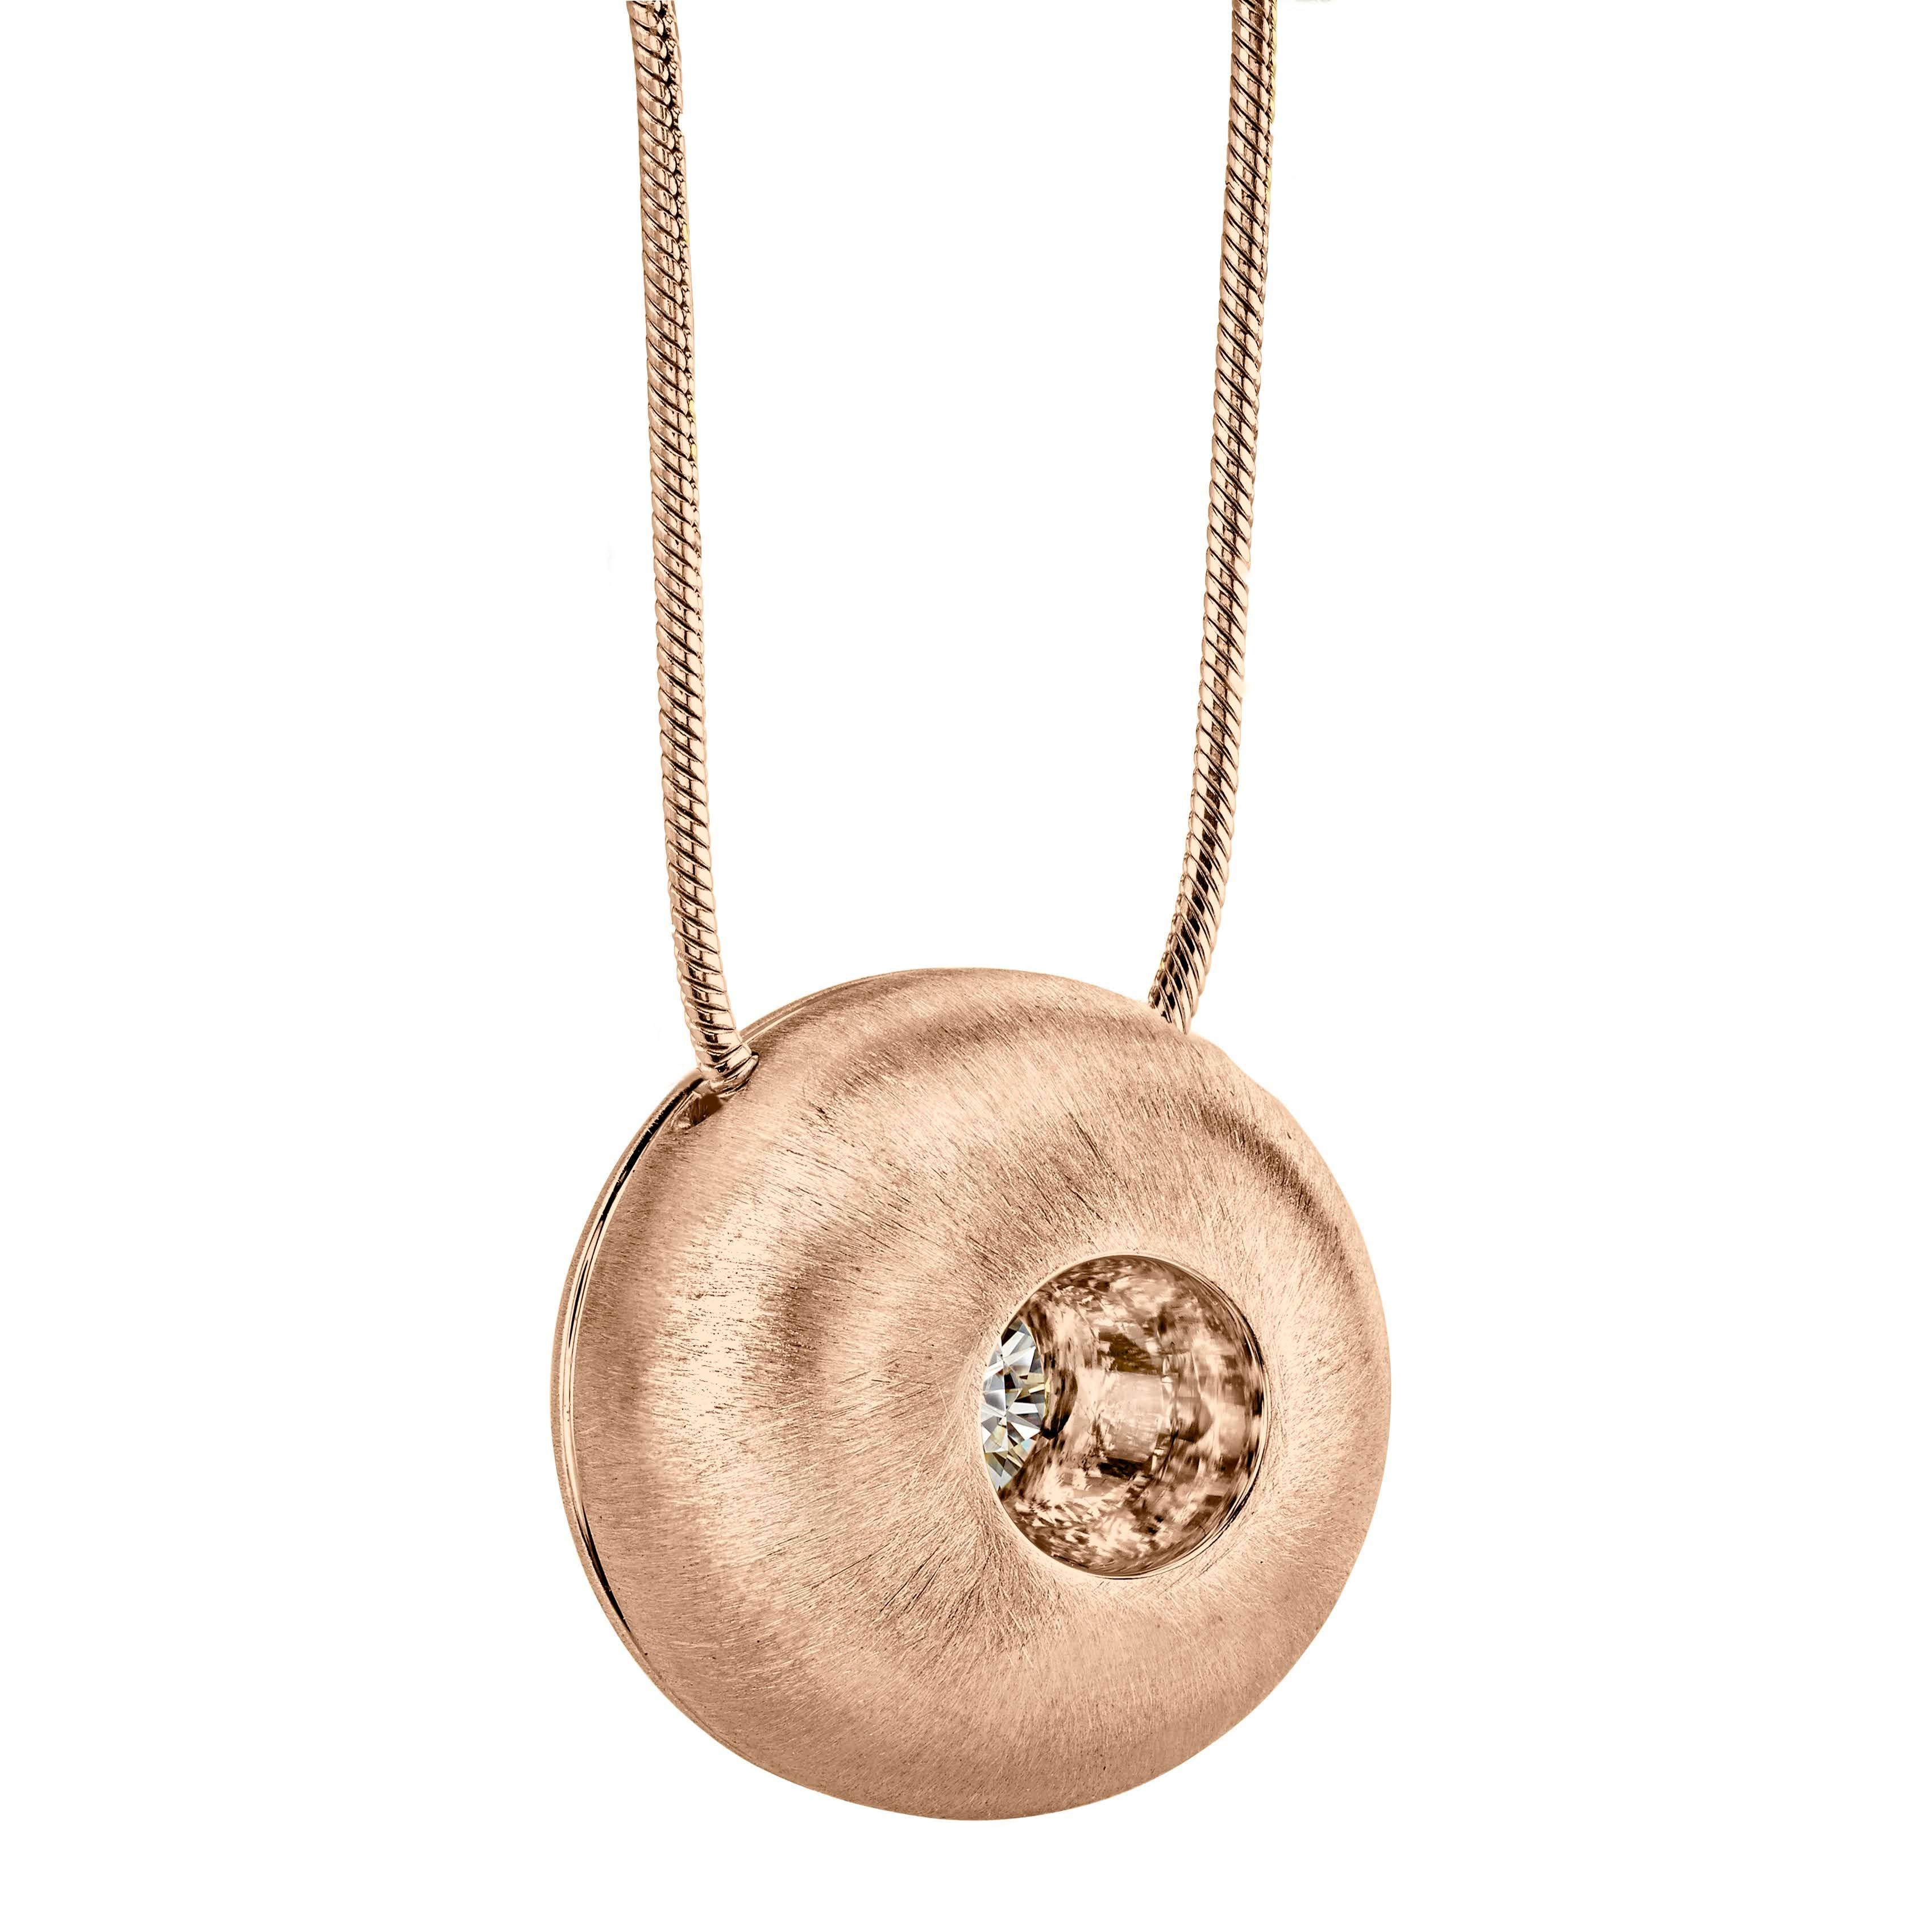 This White Sapphire in Large Rose Gold Dome Pendant, part of our Power Series, is a symbolic design inspired by the idea of looking inward, the notion of what a person needs is already inside of them. The clean and classic lines are imaginative,